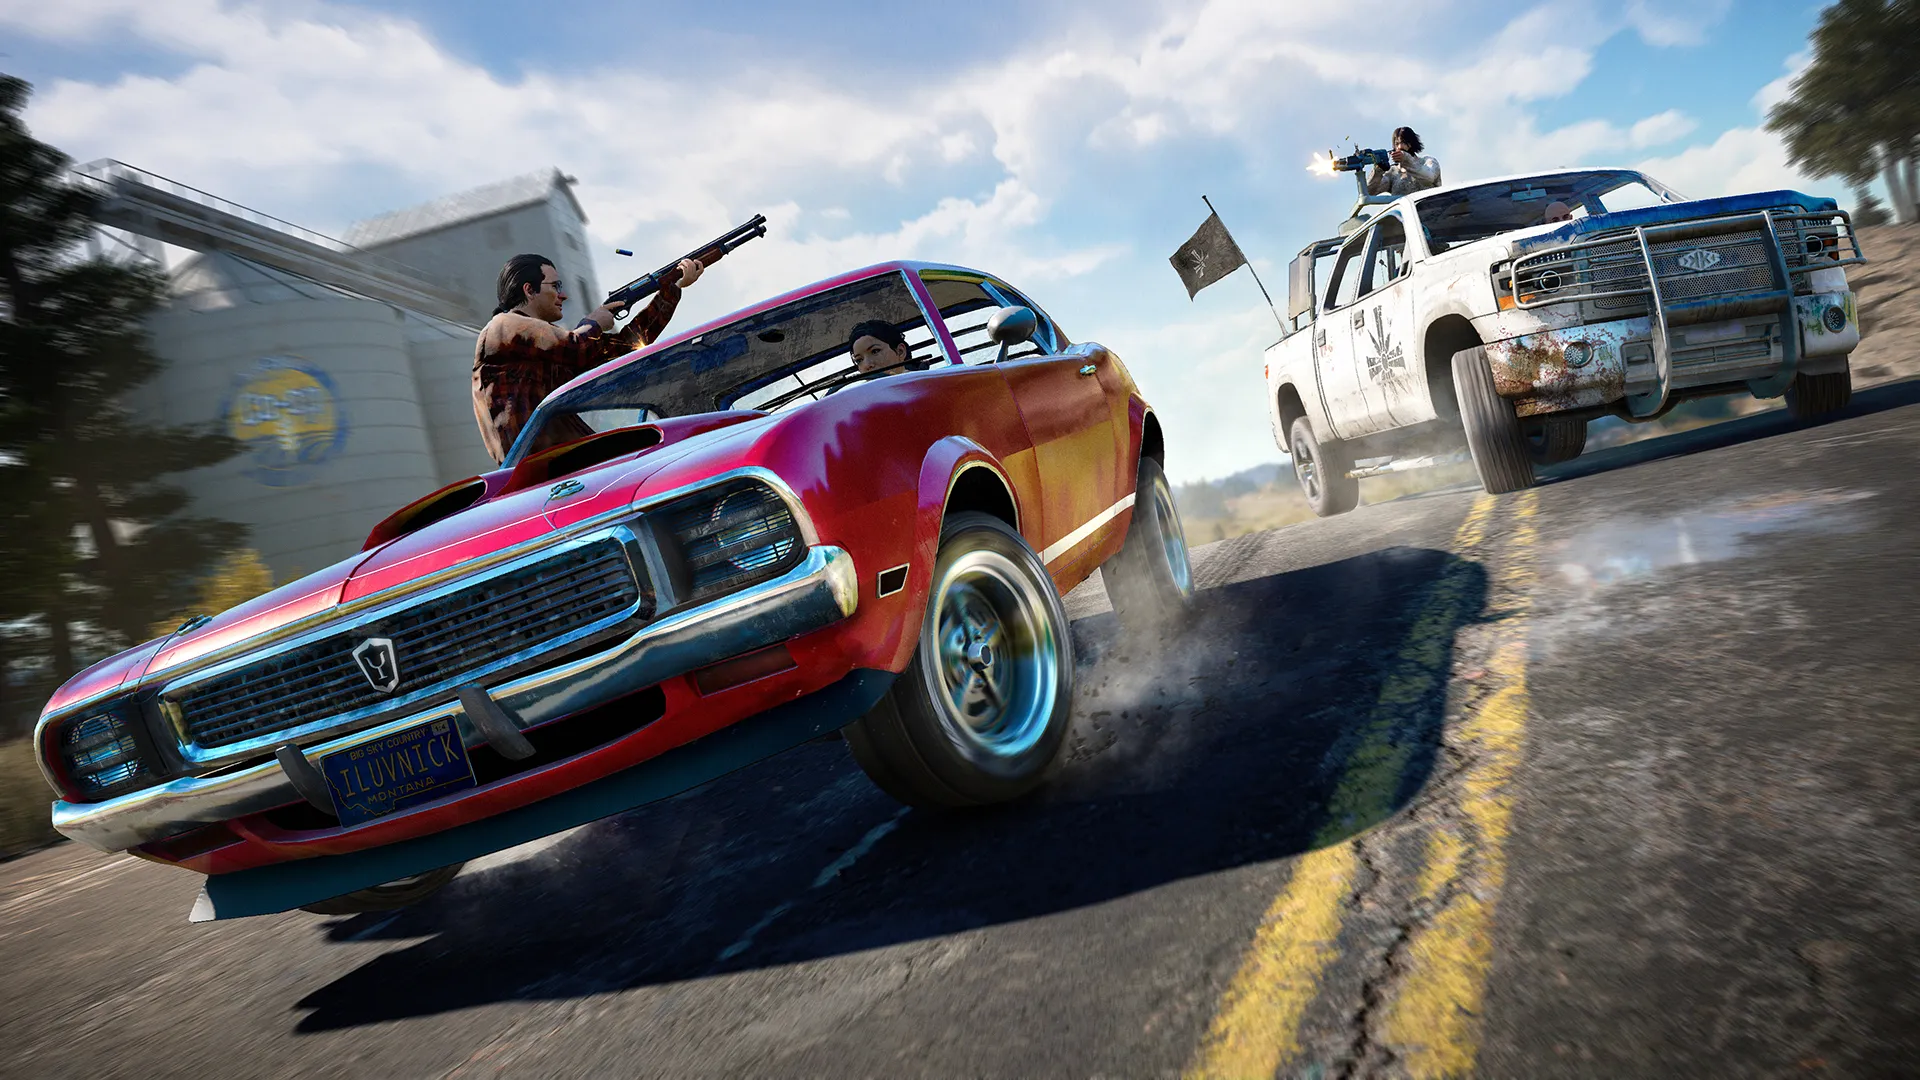 Far Cry 5 PC System Requirements Announced